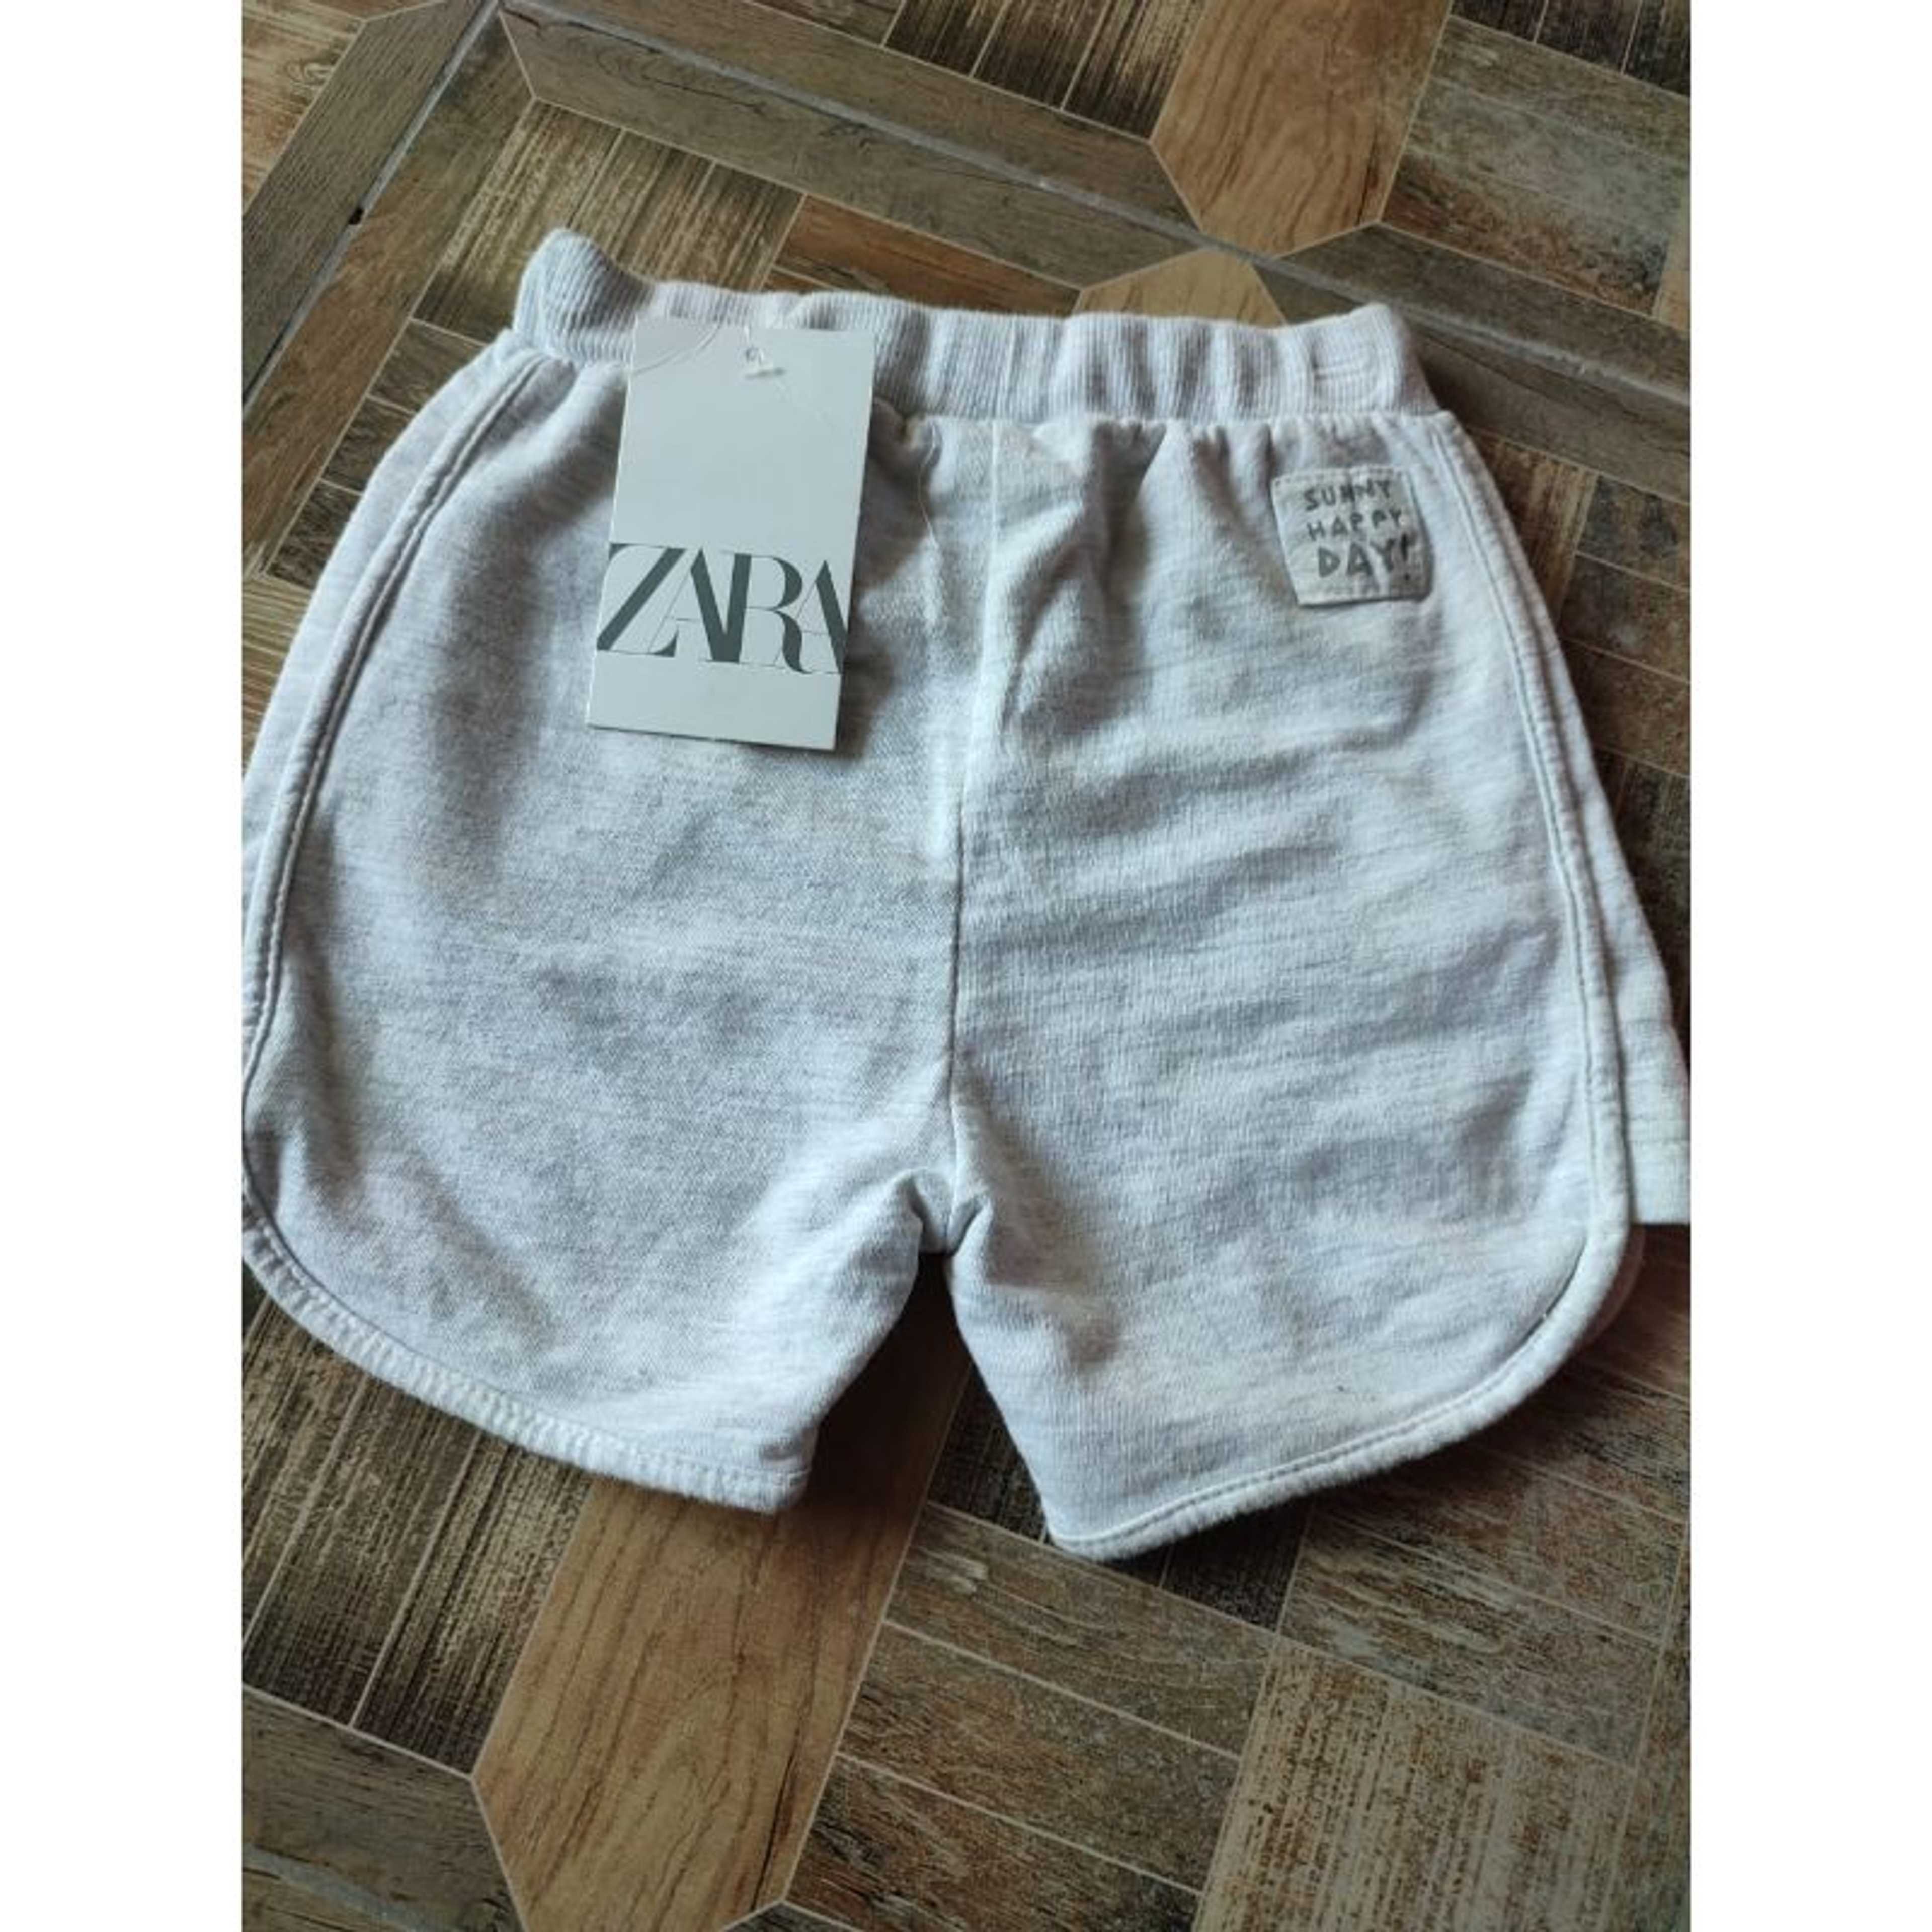 Boys shorts in White color